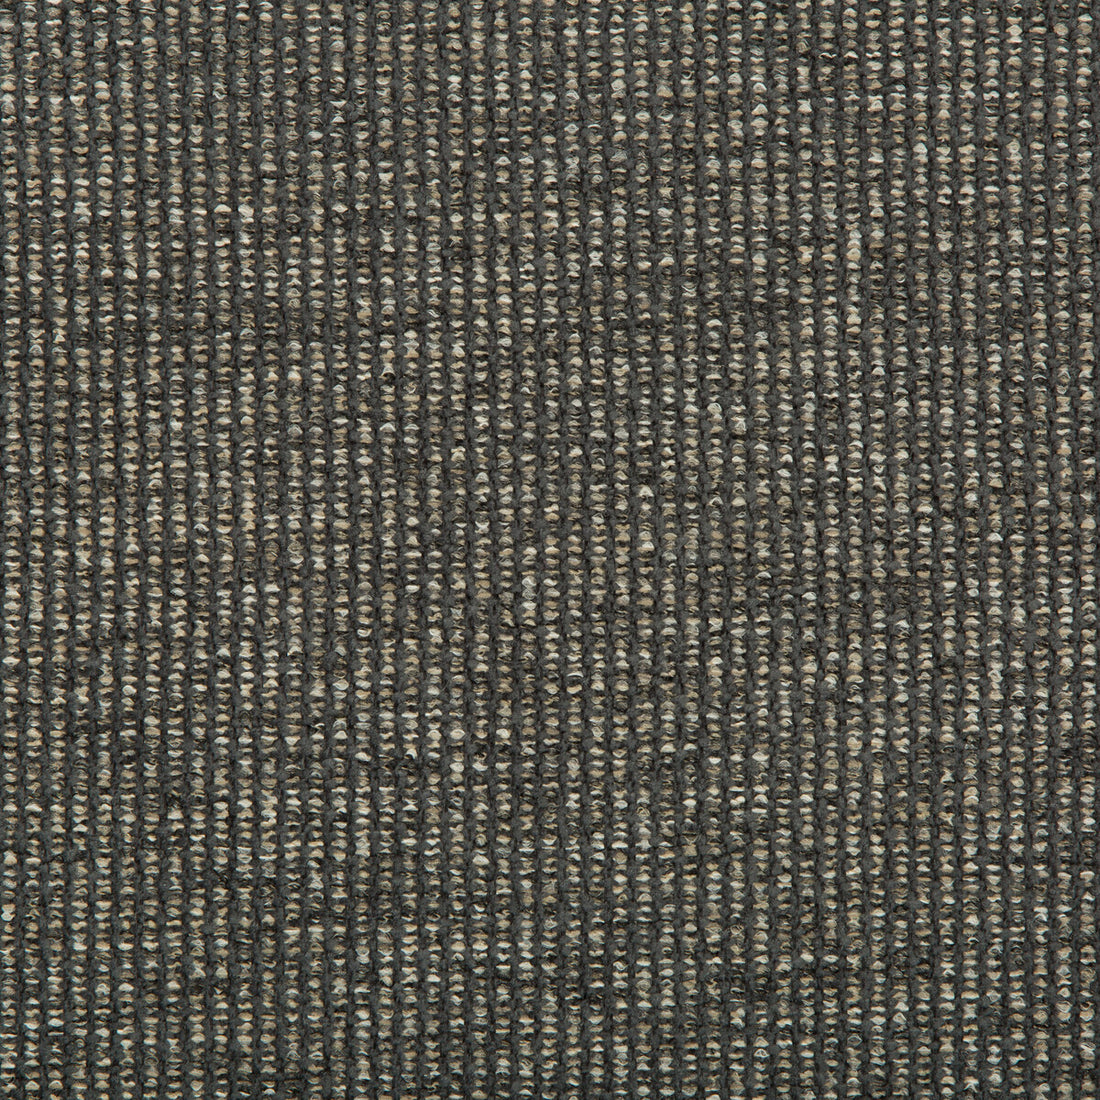 Kravet Contract fabric in 35433-21 color - pattern 35433.21.0 - by Kravet Contract